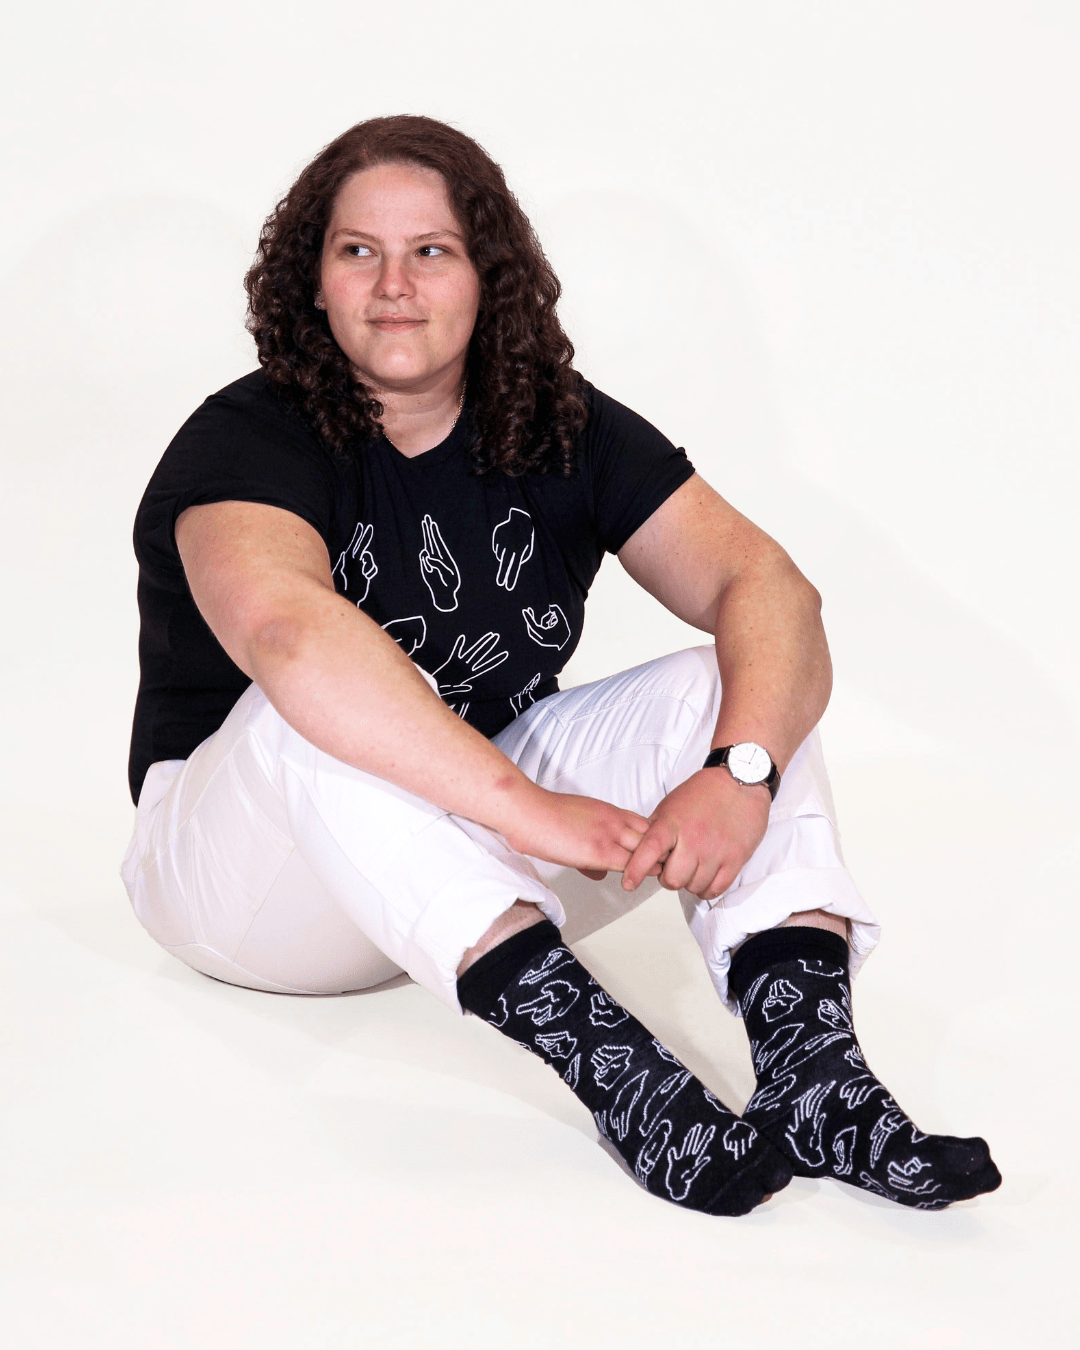 Model Jenny is wearing the Fisting 101 socks. The socks are black with line drawings of hand positions for sex in white color. The illustration was designed by Ren Strapp. The socks are Cotton crew style. The one size will fit a woman's size 6 up to a men's size 11.